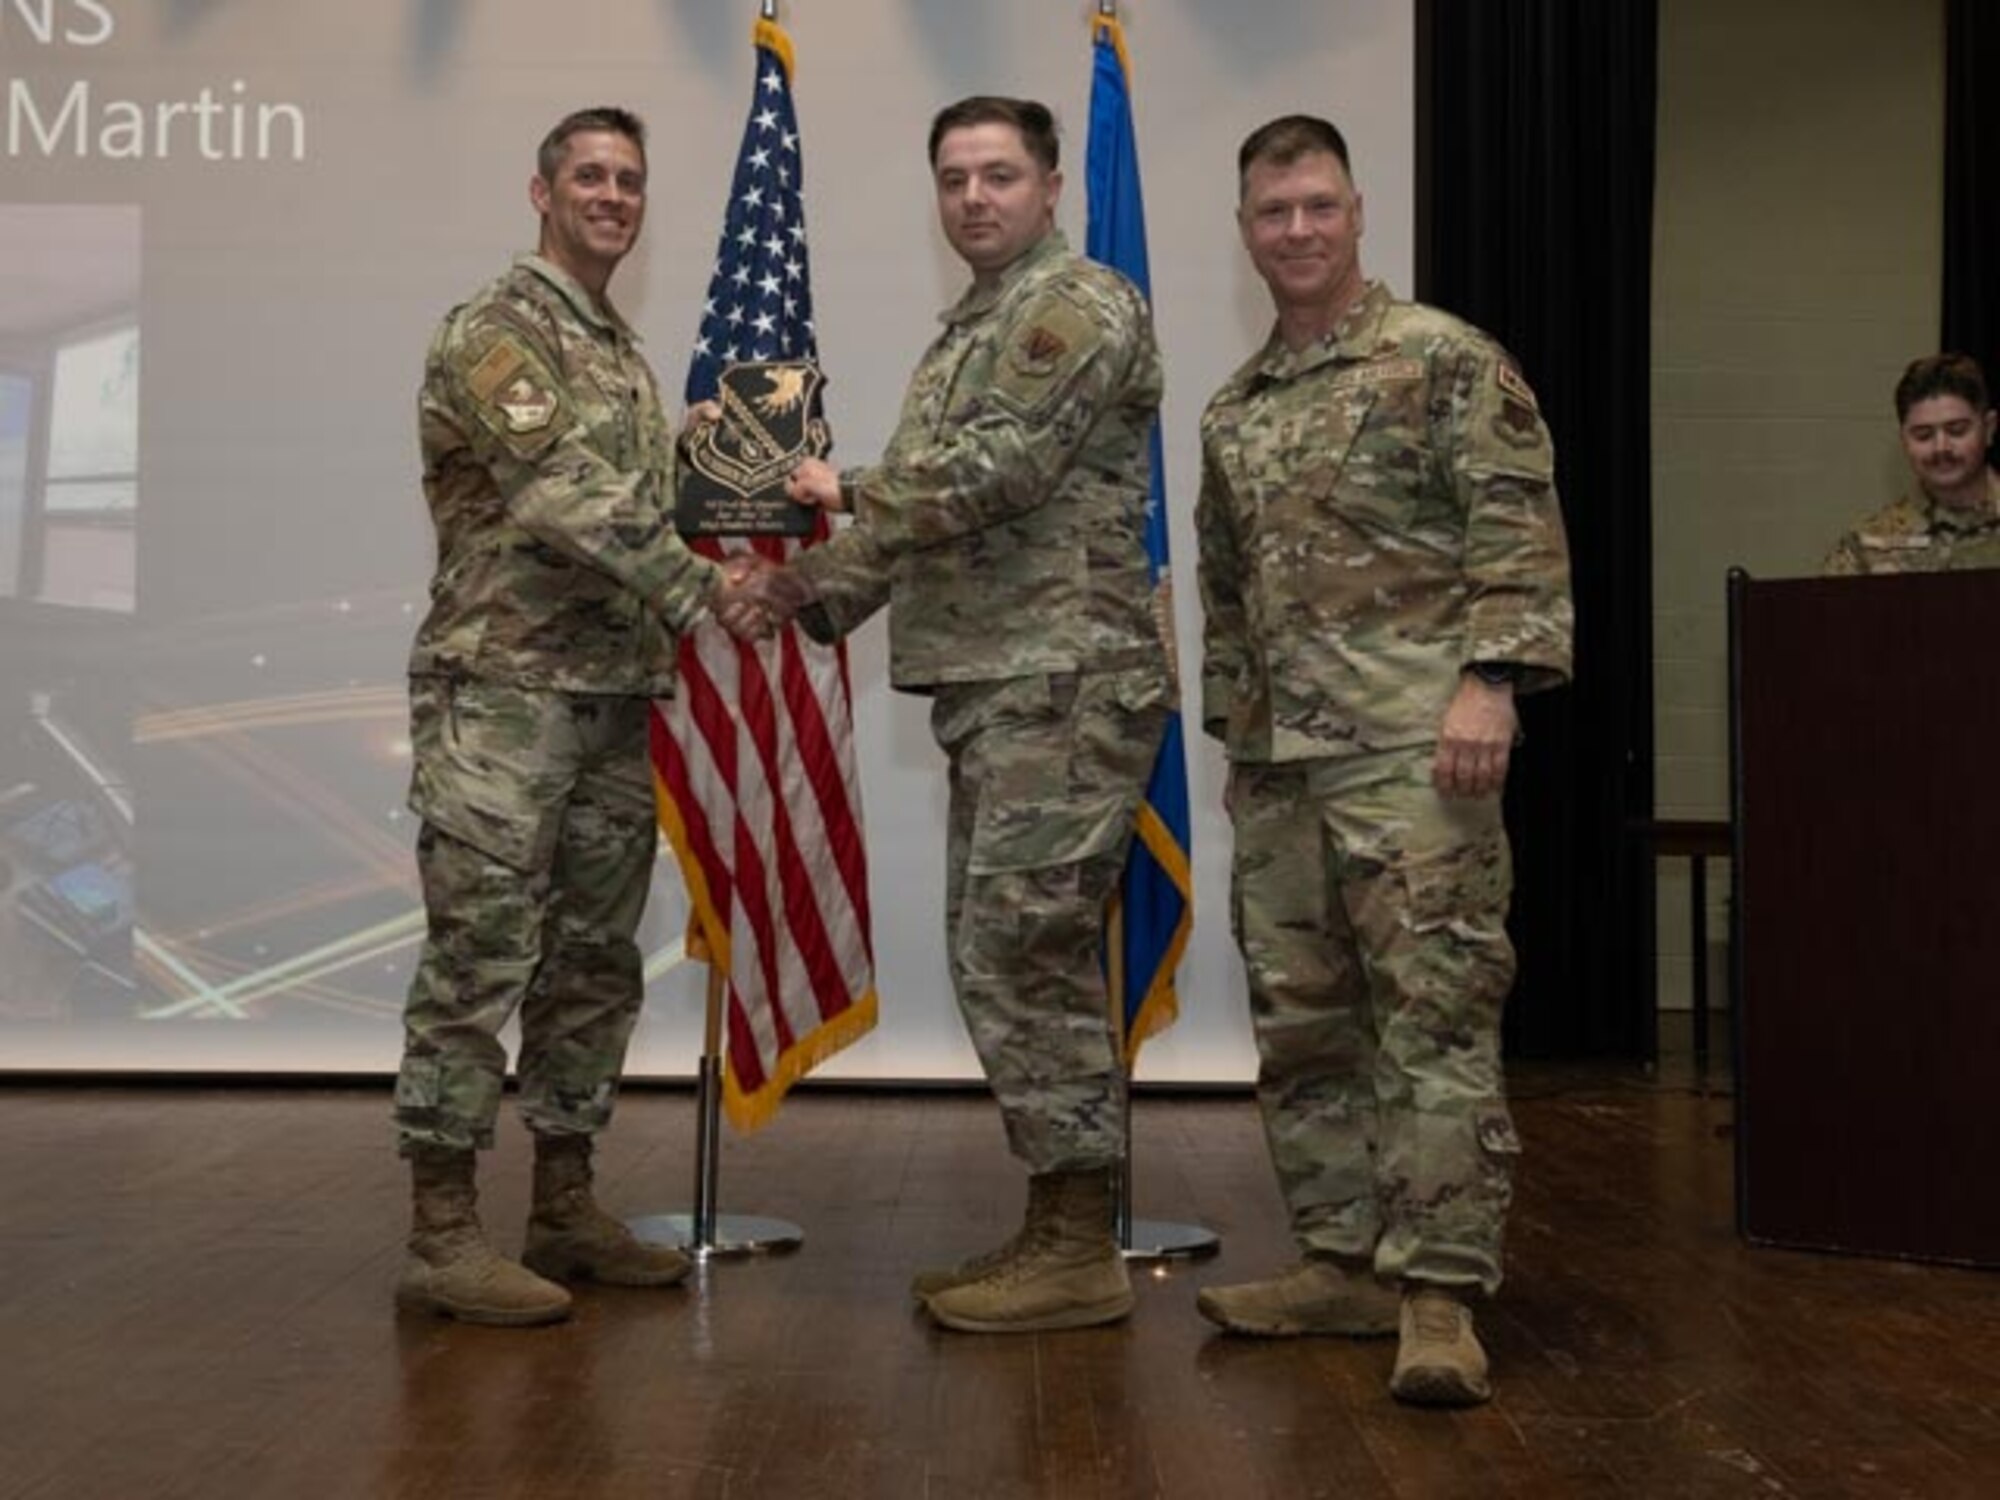 U.S. Air Force Lt. Col. James Melvin, left, Mission Support Group deputy commander, and Chief Master Sgt. Edward Mueller, right, Mission Support Group senior enlisted leader, presents Staff Sgt. Andrew Martin, center, contracting officer, with the Noncommissioned Officer of the First Quarter Award at Seymour Johnson Air Force Base, North Carolina, April 19, 2024. The ceremony recognized 10 individual award winners and one team for outstanding performance. (U.S. Air Force photo by Airman Megan Cusmano)